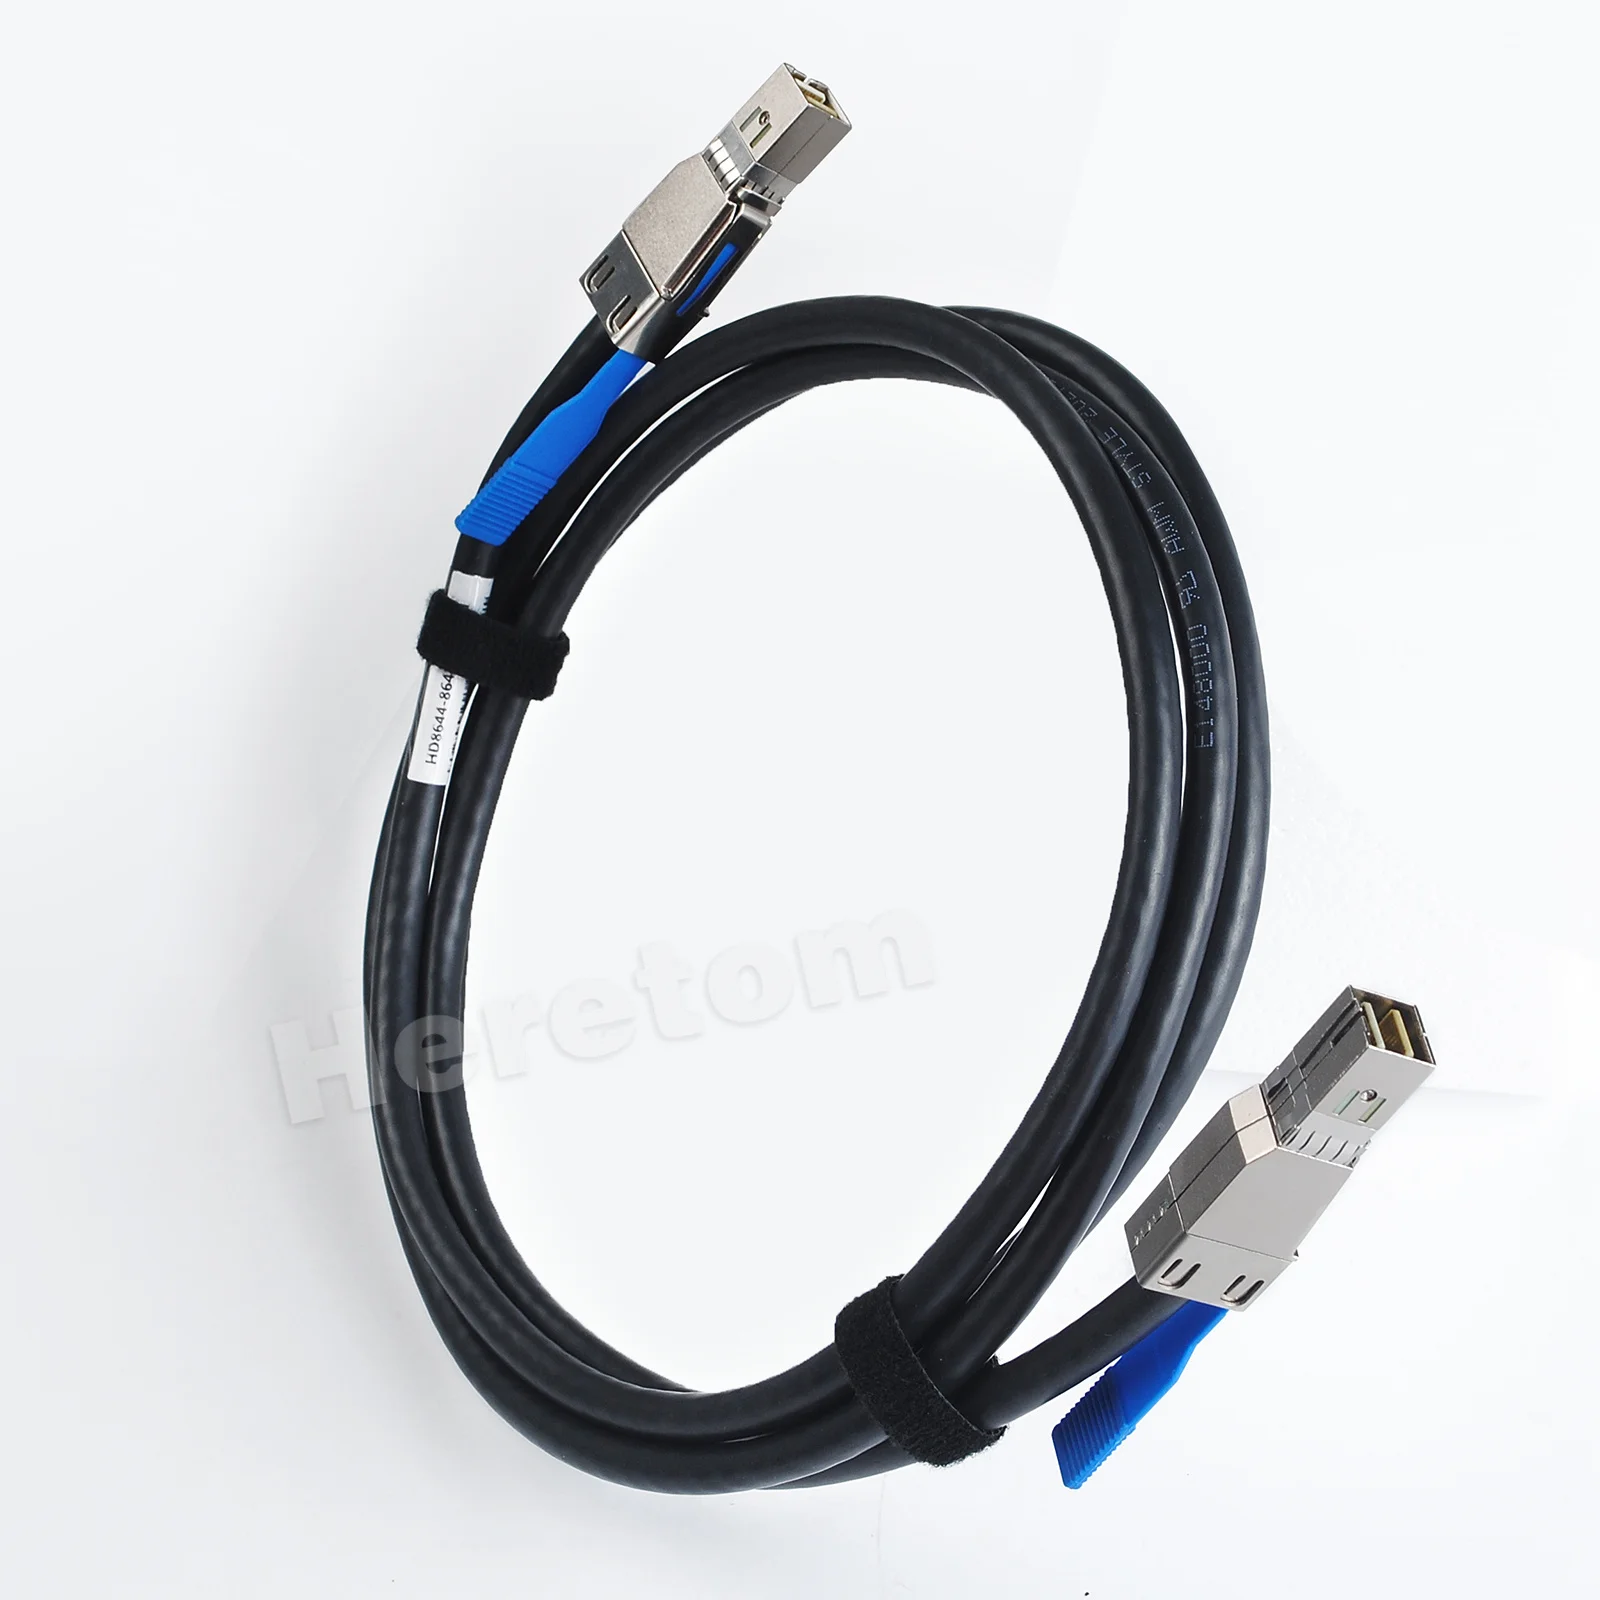 

GYK61 For Dell Md1400 External 12gb HD Mini SAS Cable SFF-8644 to SFF-8644 Cable 0GYK610GYK61 MD1420 MD3420 1M/2Mm